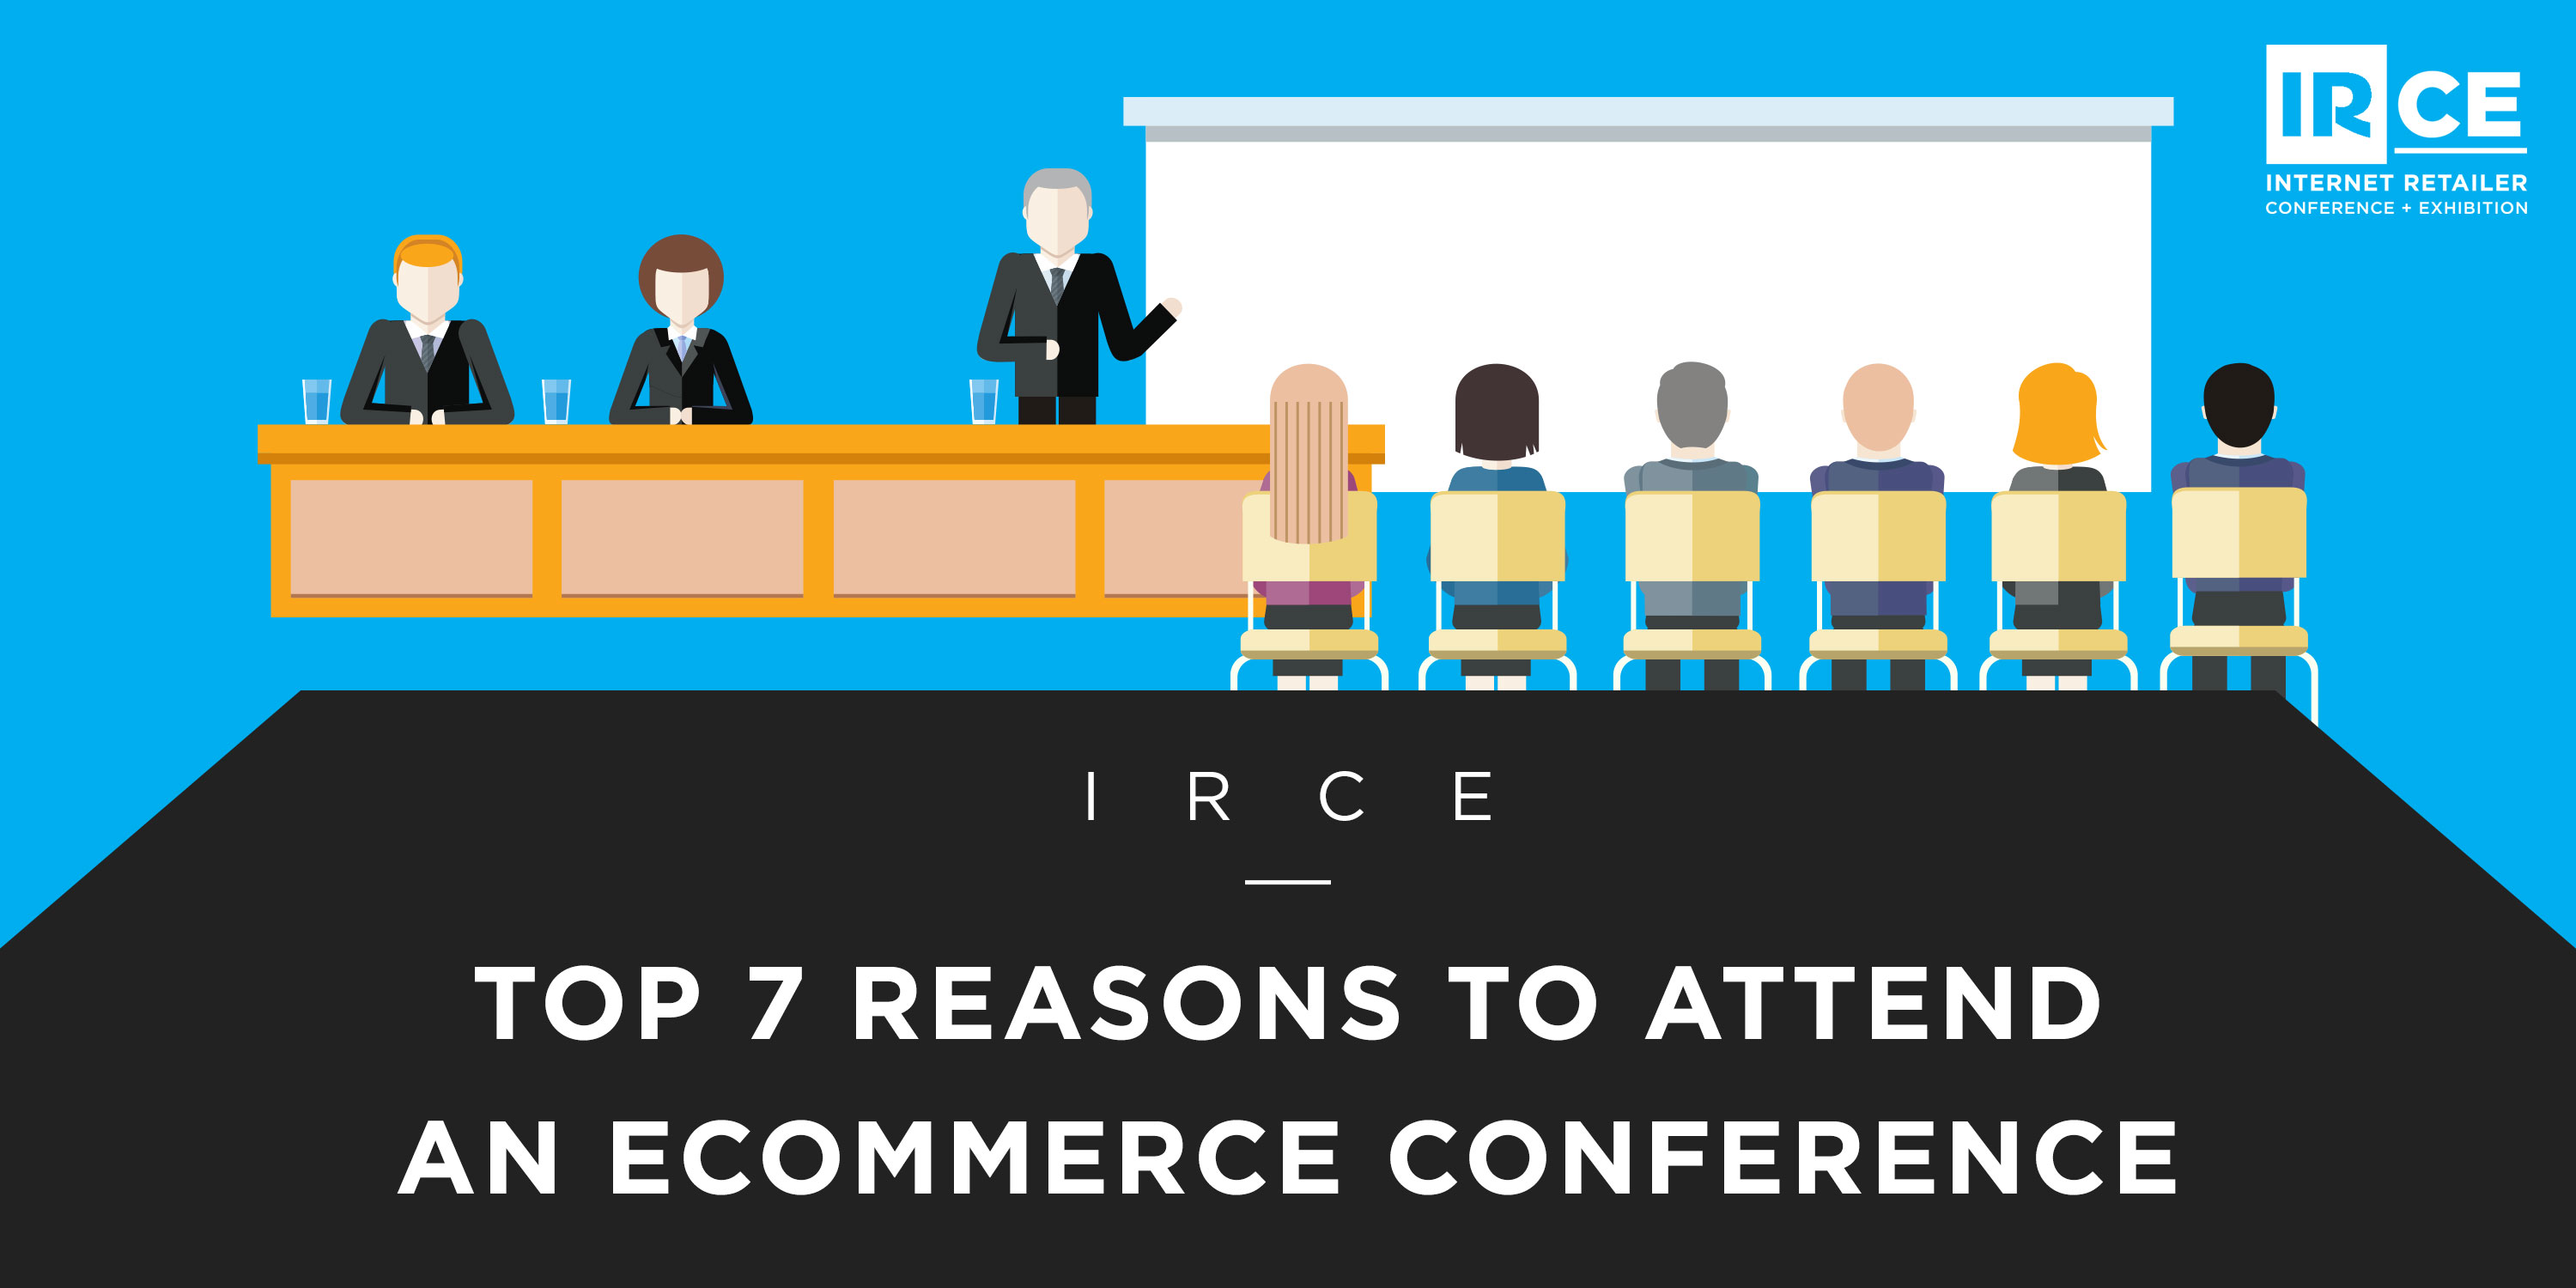 IRCE: Top 7 Reasons to Attend an Ecommerce Conference